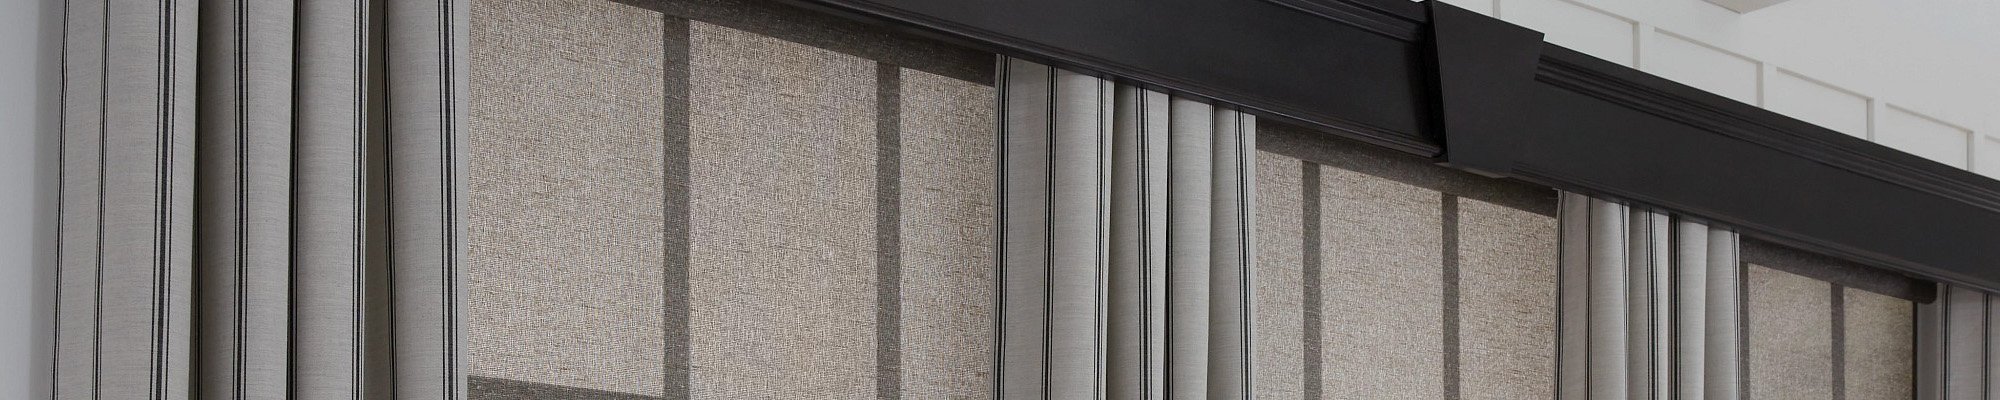 Graber Blinds - Delight in every detail